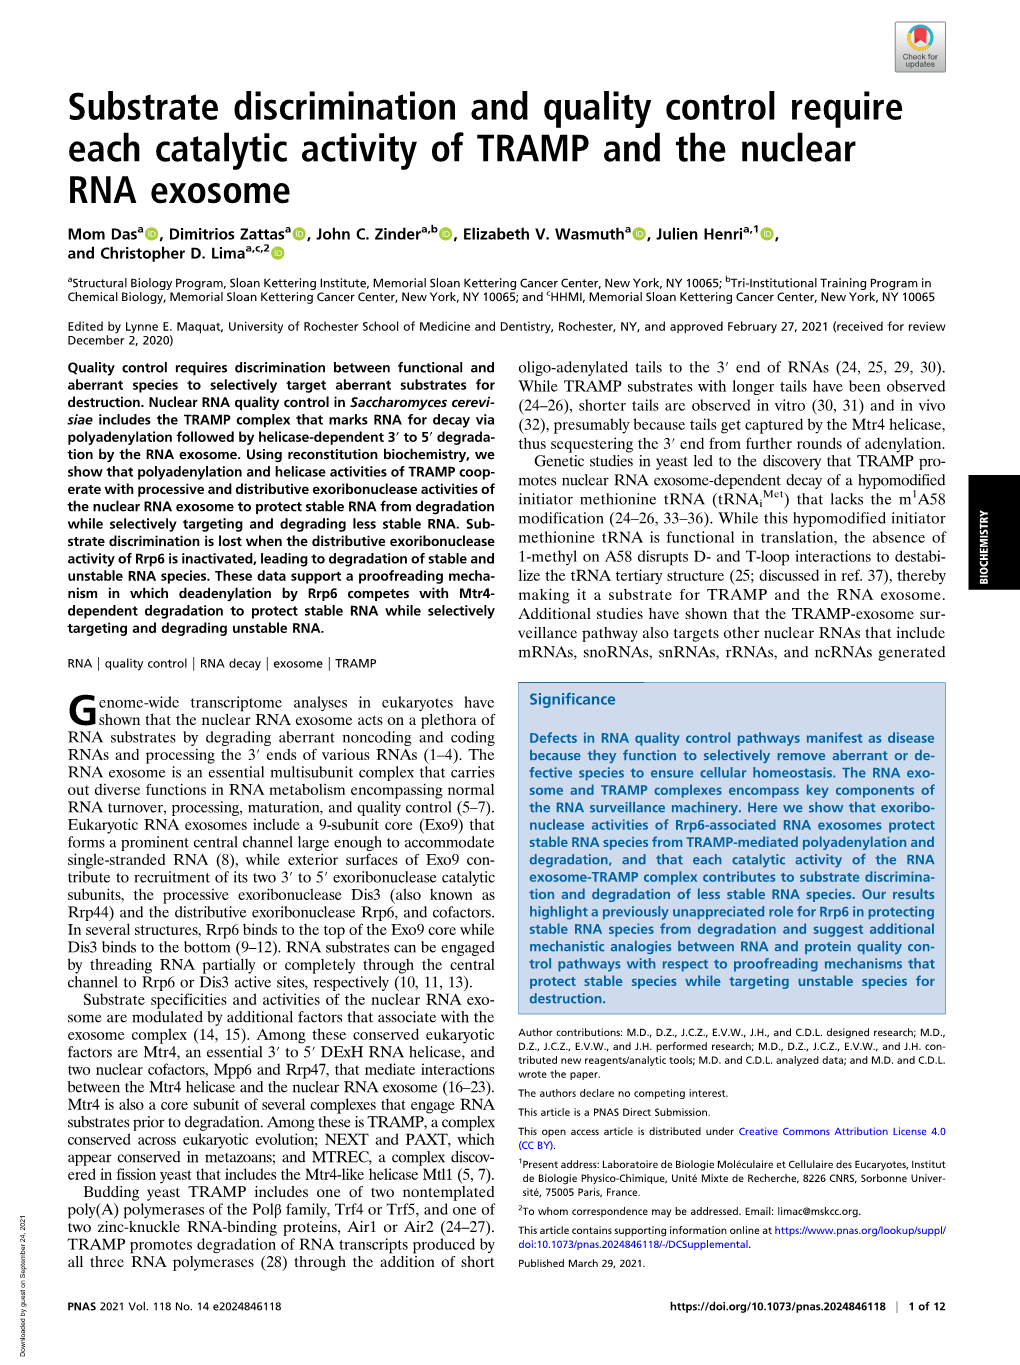 Substrate Discrimination and Quality Control Require Each Catalytic Activity of TRAMP and the Nuclear RNA Exosome